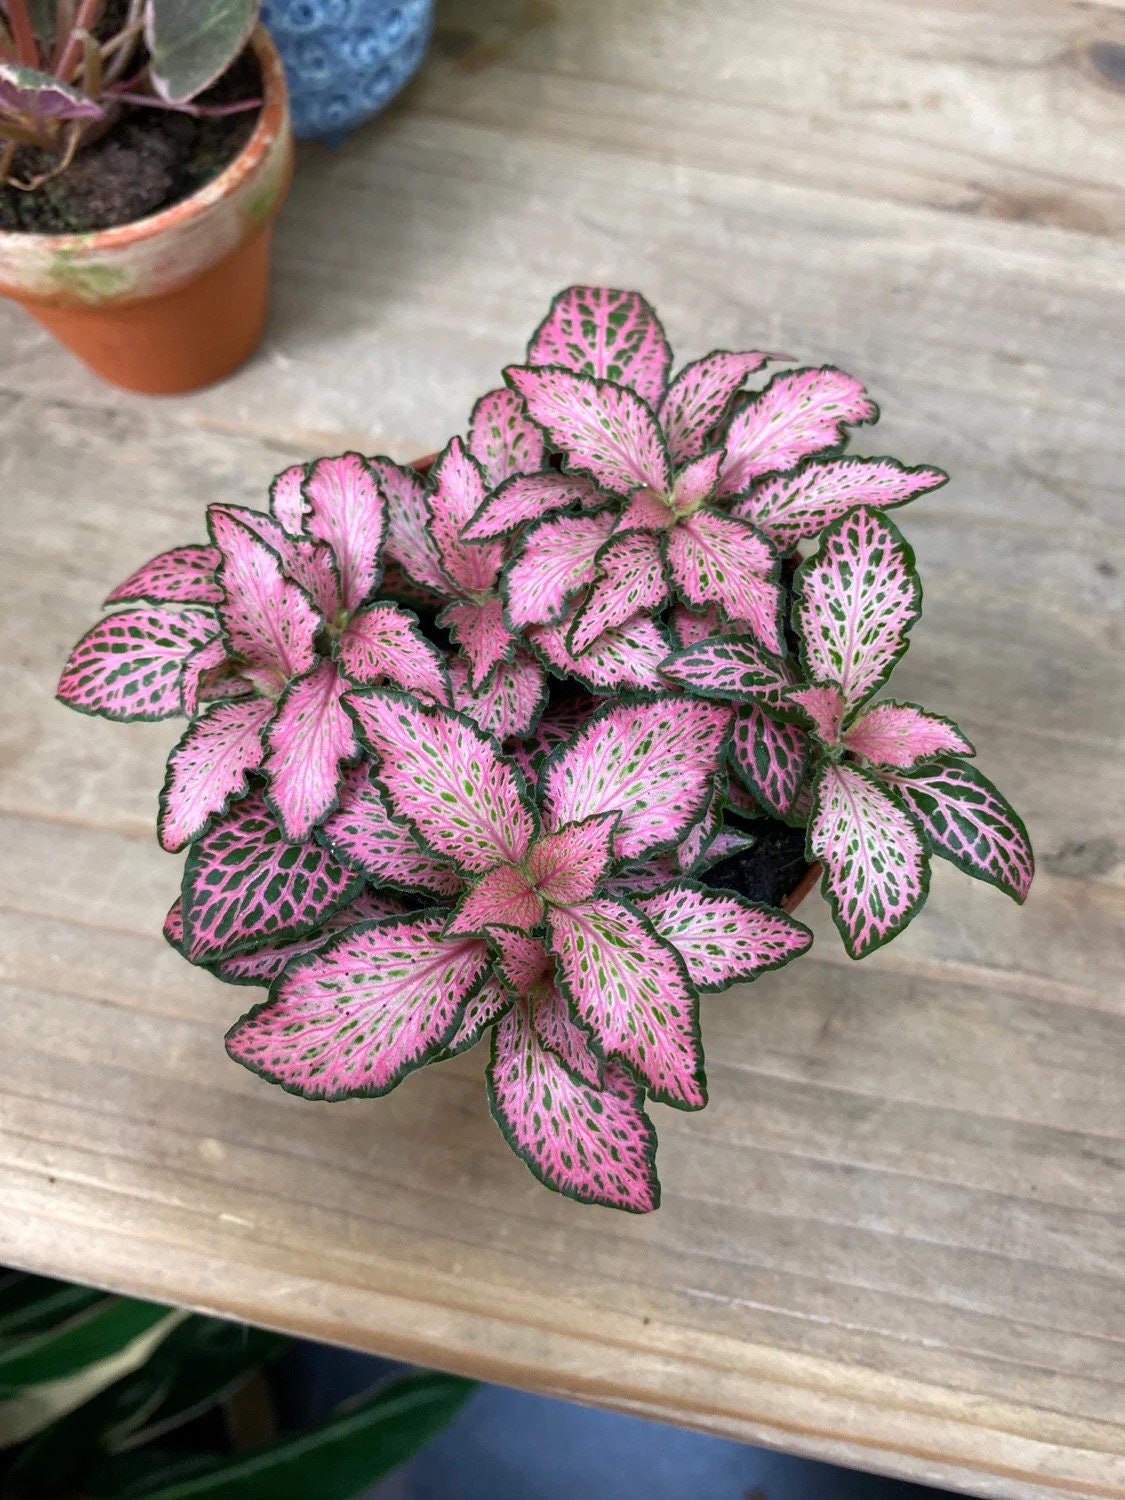 Polka Dot Plant Seeds, Indoor Live House Plant, Hypoestes Phyllostachya,  Red, Pink, White, Rainbow, Perennial HY01 